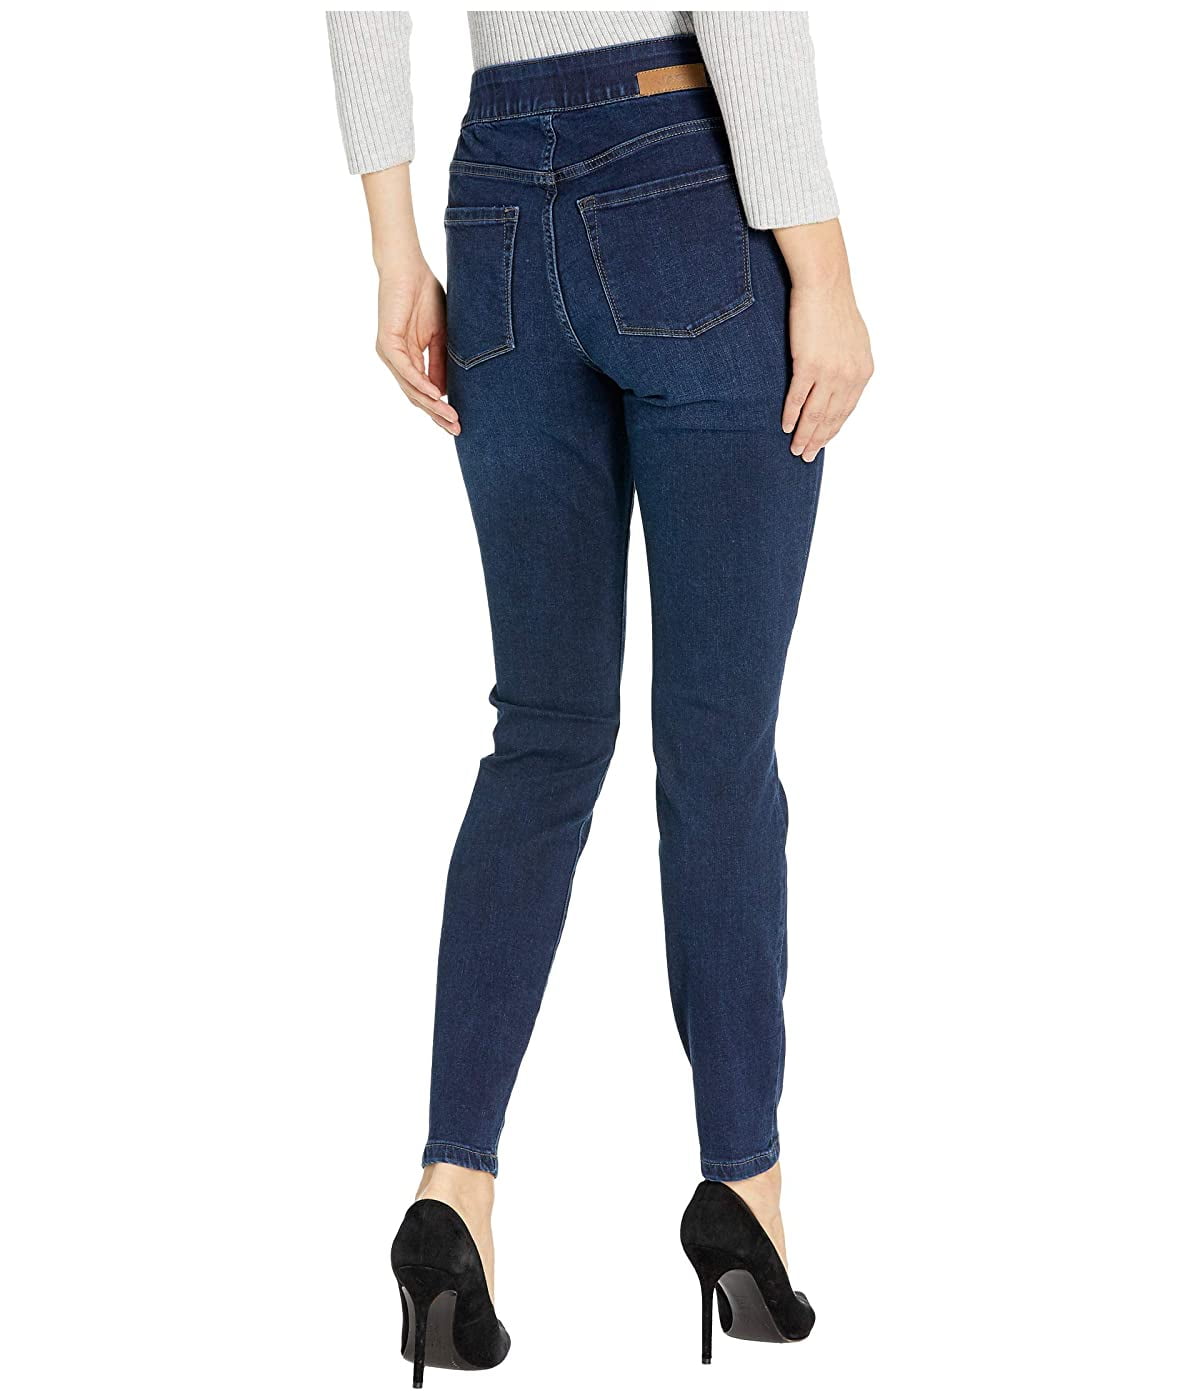 JAG Jeans - Jag Jeans Maya Skinny Pull-On Jeans in Deluxe Denim Pacific ...